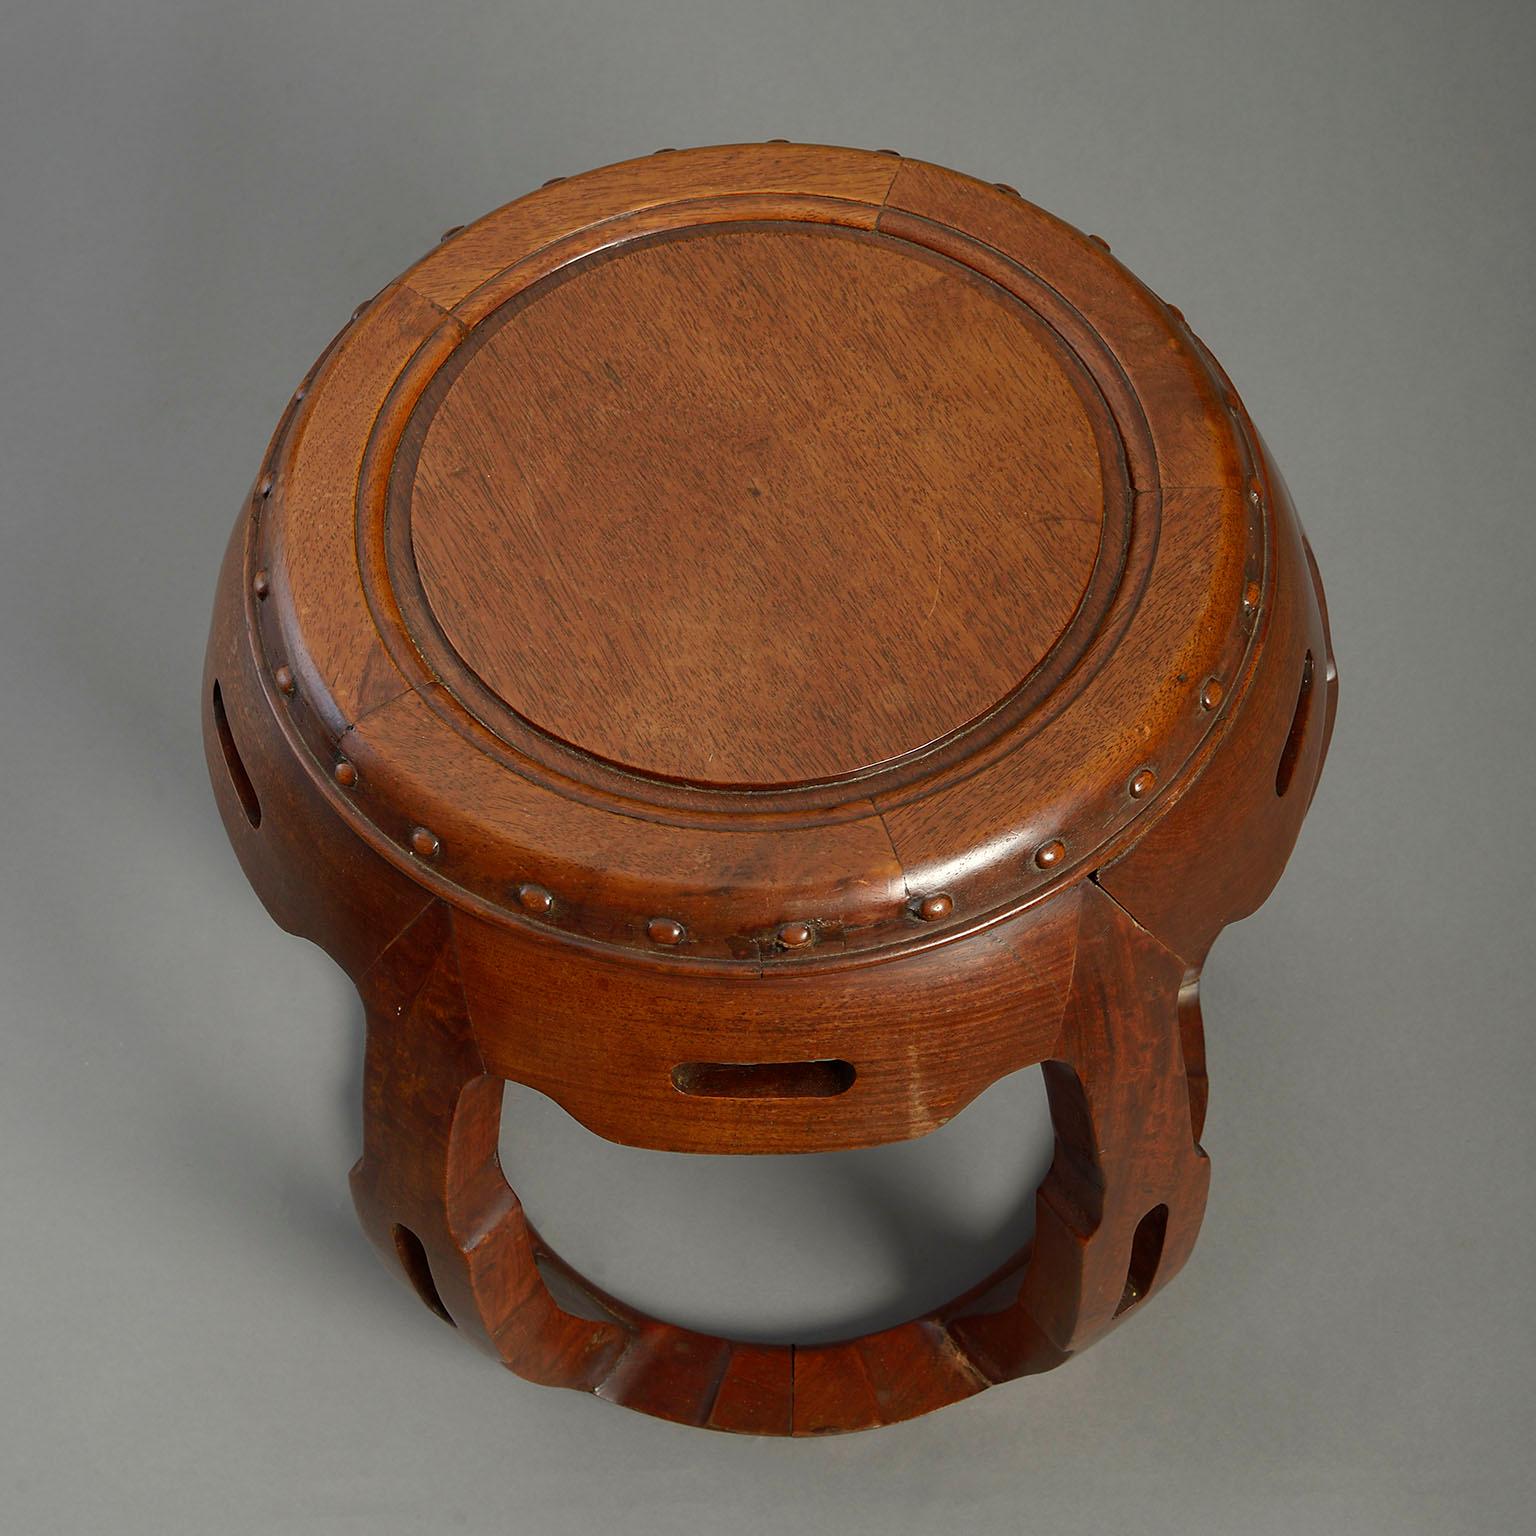 An early 20th century hardwood stool or low table of barrel form, the circular top upon pierced upright supports and set upon a ring base.